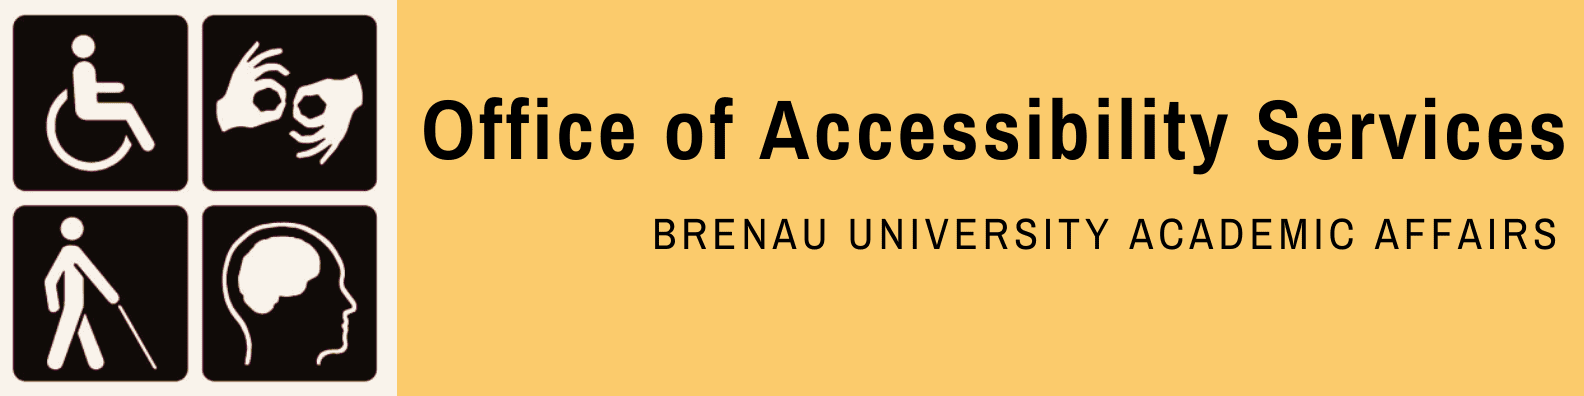 Office of Accessibility Services Name Banner 